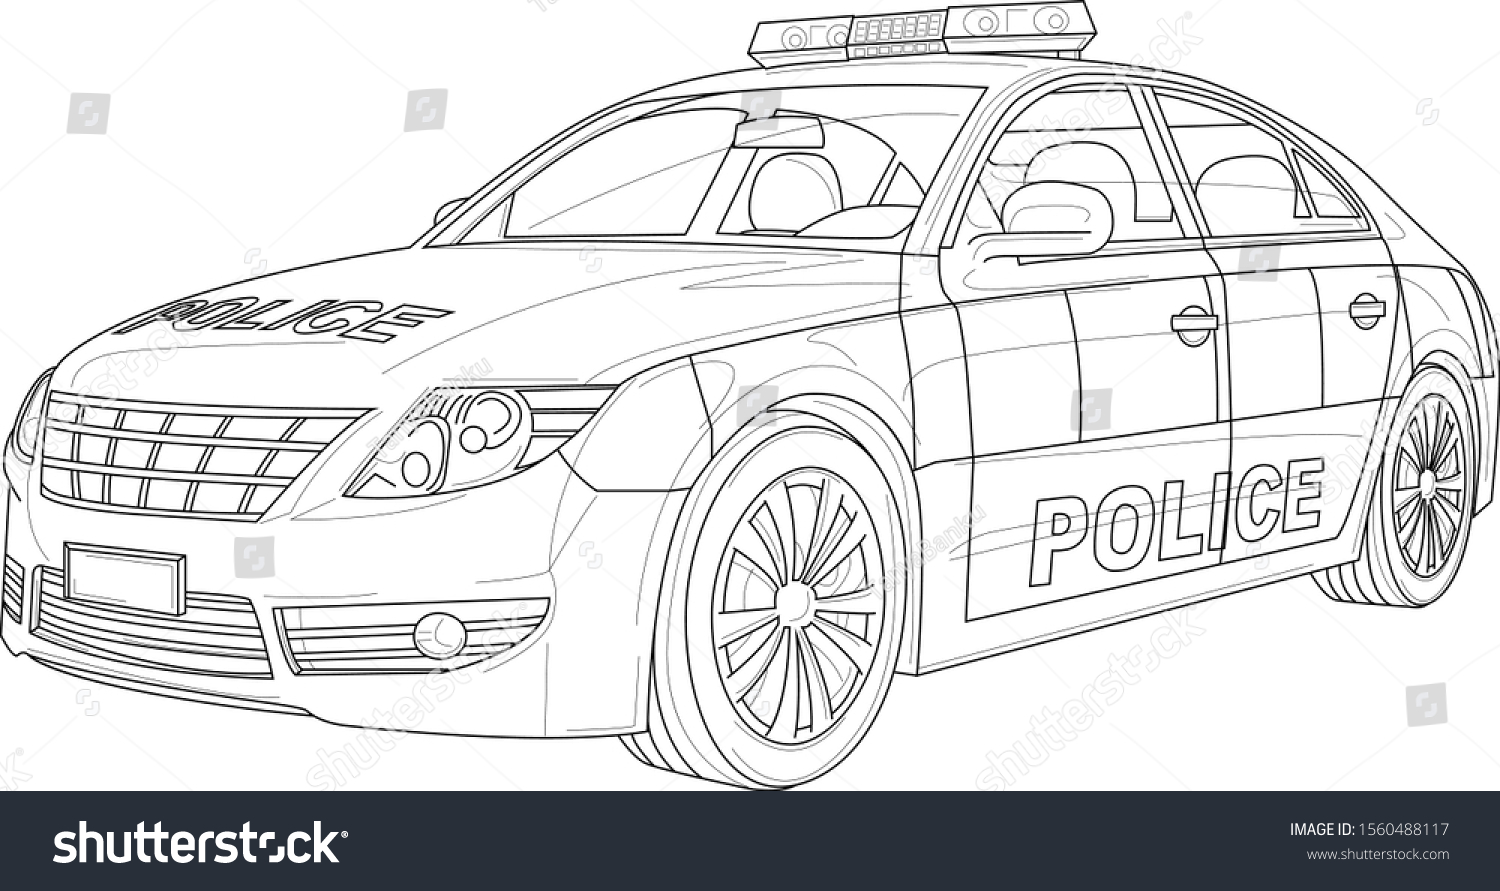 4,587 Police Car Drawing Images, Stock Photos & Vectors ...